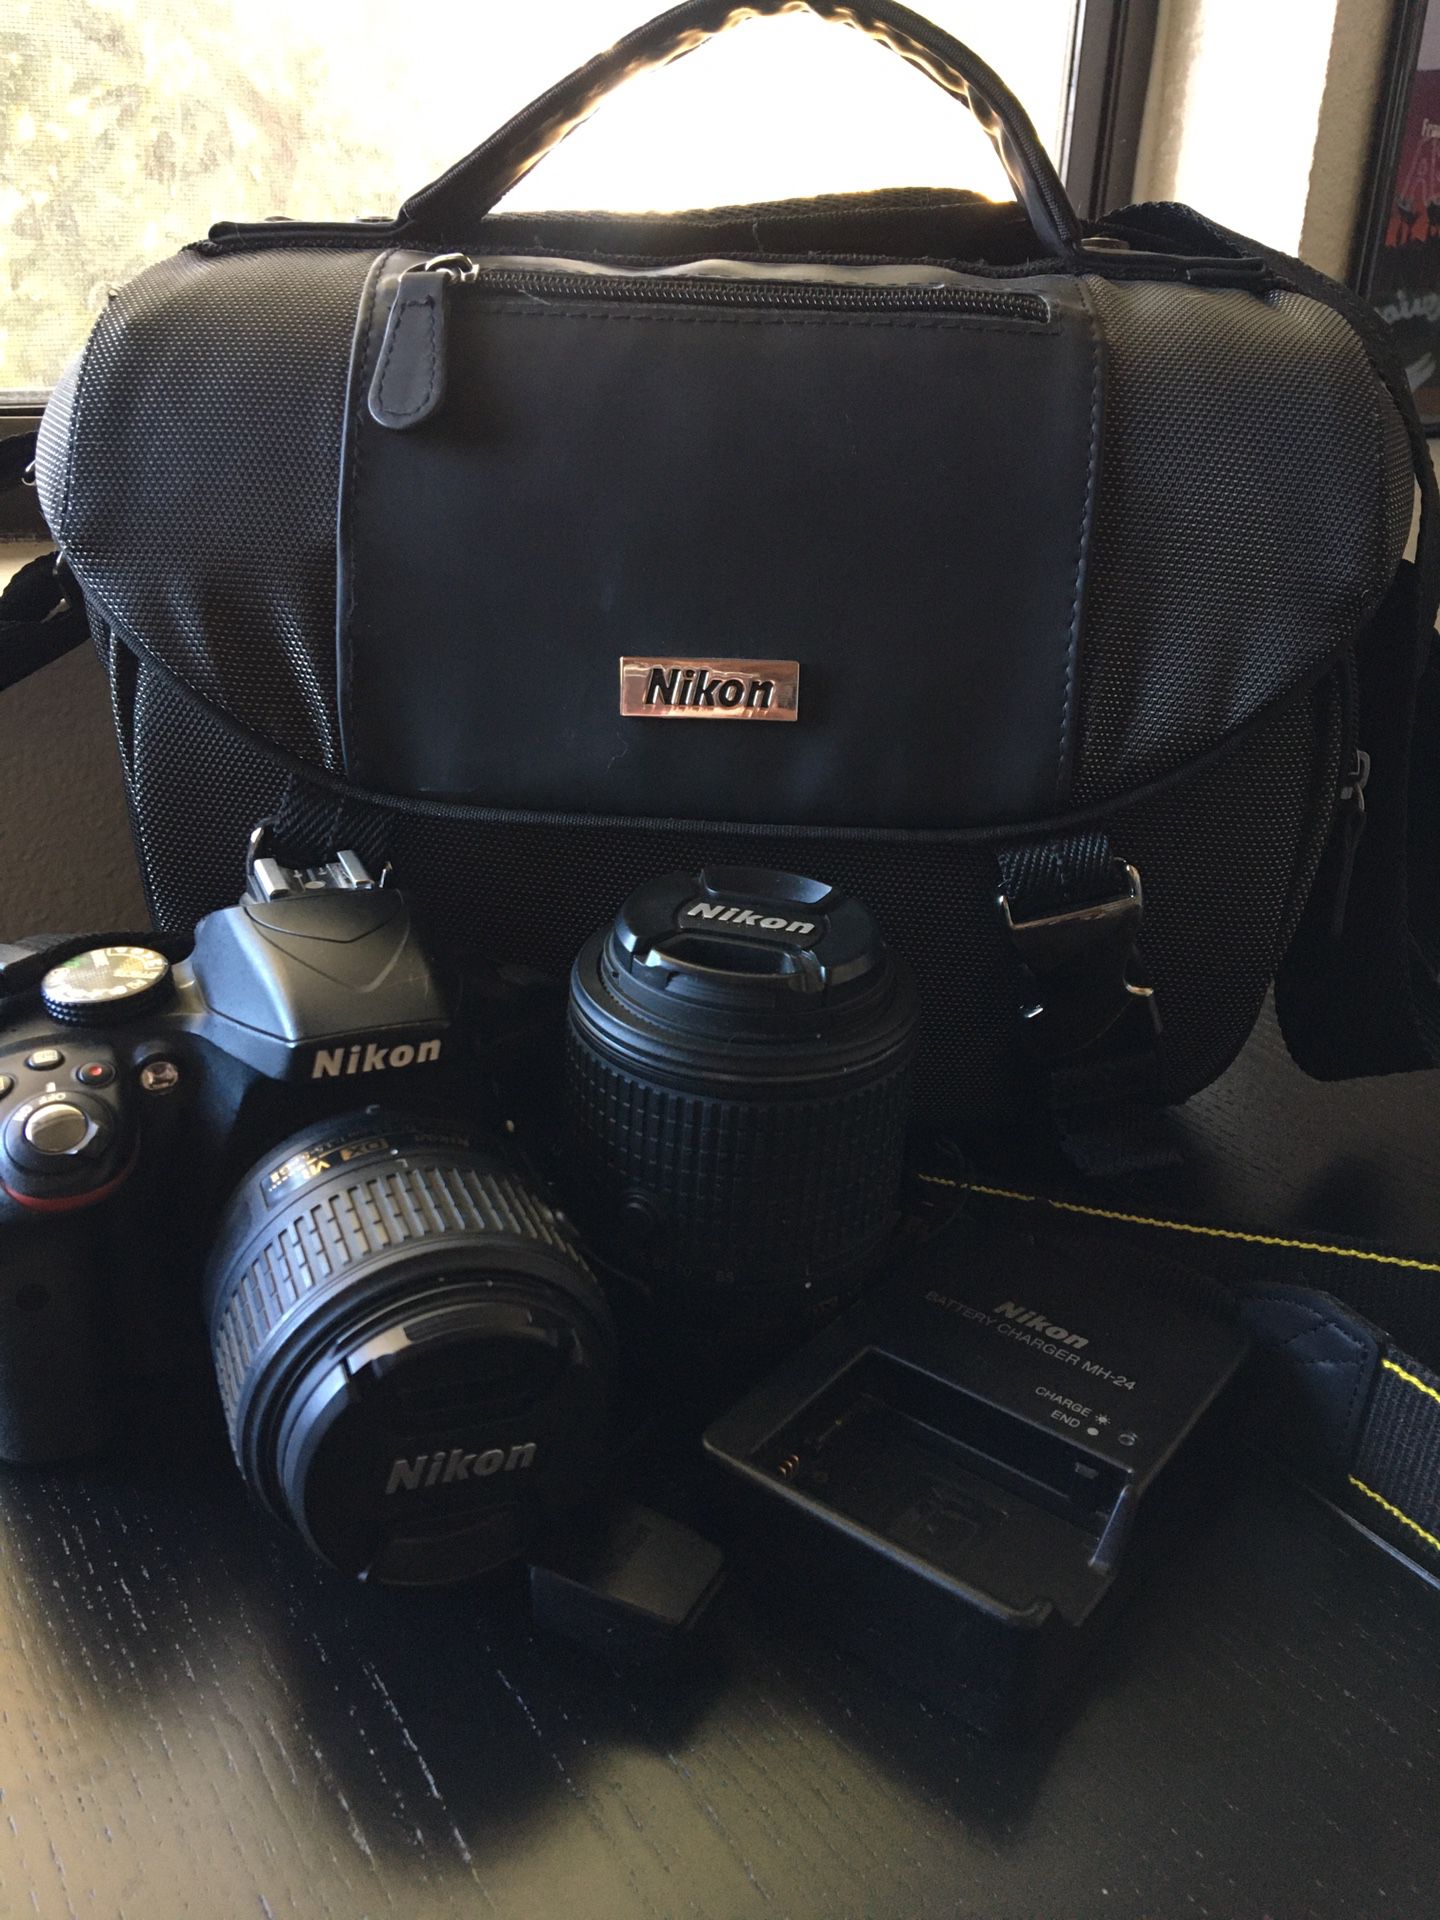 Nikon D3300 Kit with 2 lenses, Charger, WiFi Adapter